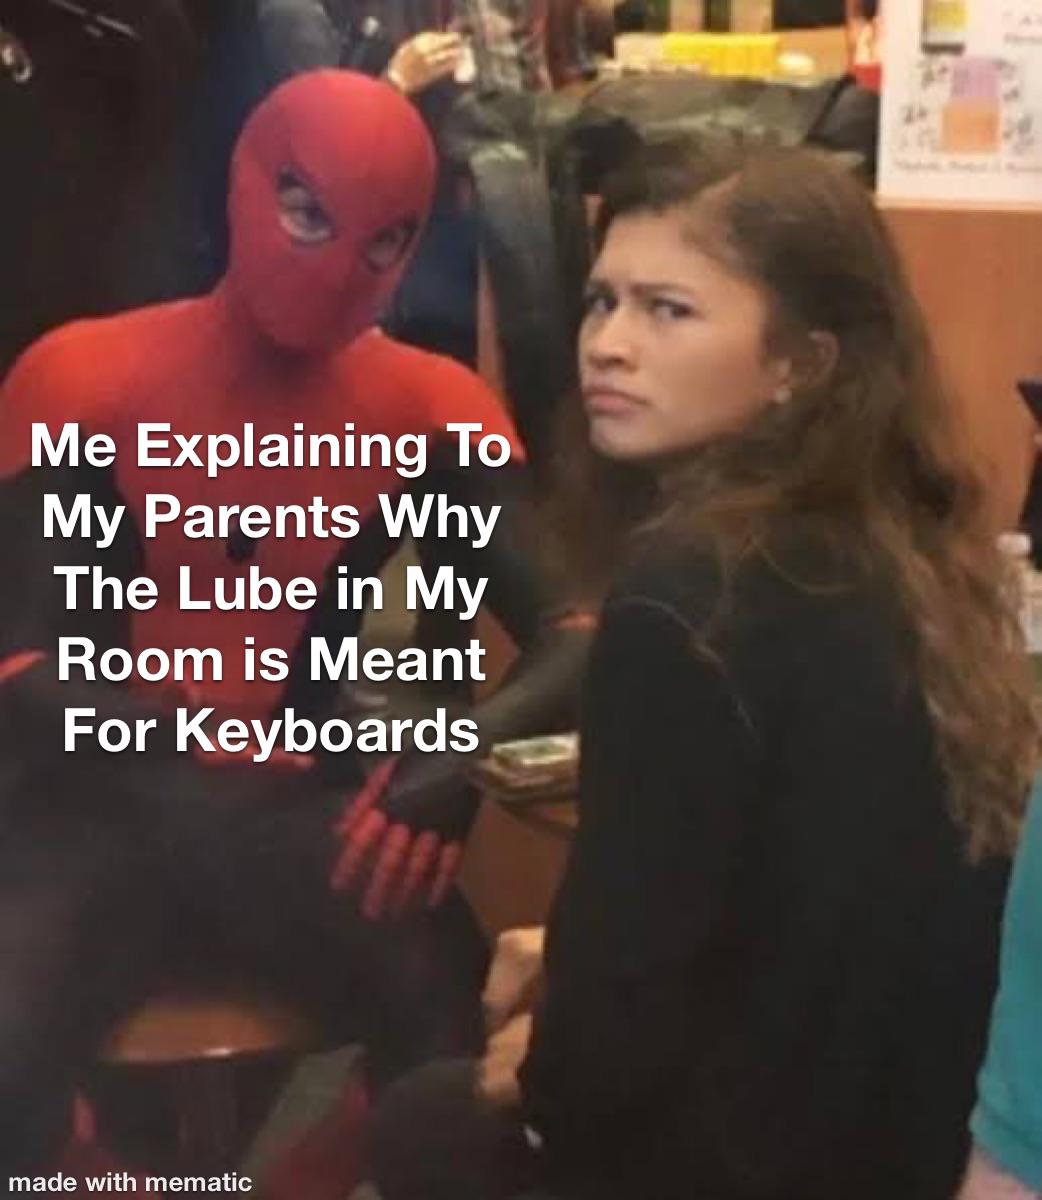 dank memes - spider man 1 memes - Me Explaining To My Parents Why The Lube in My Room is Meant For Keyboards made with mematic